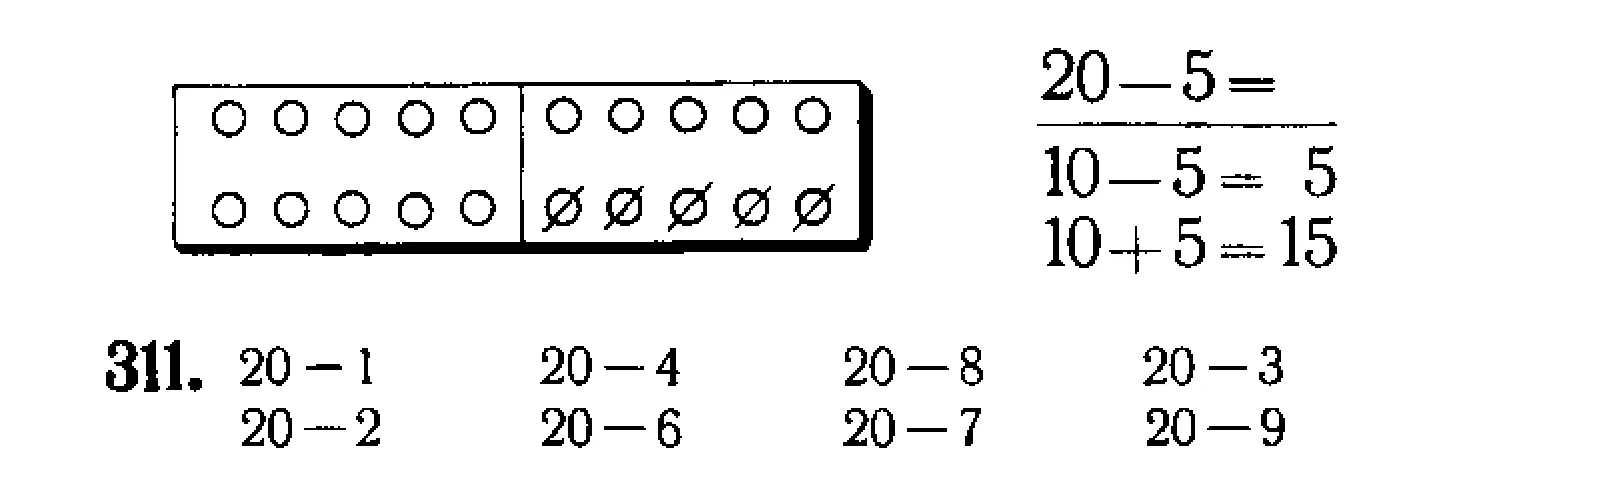 Domino and numbers up to 20